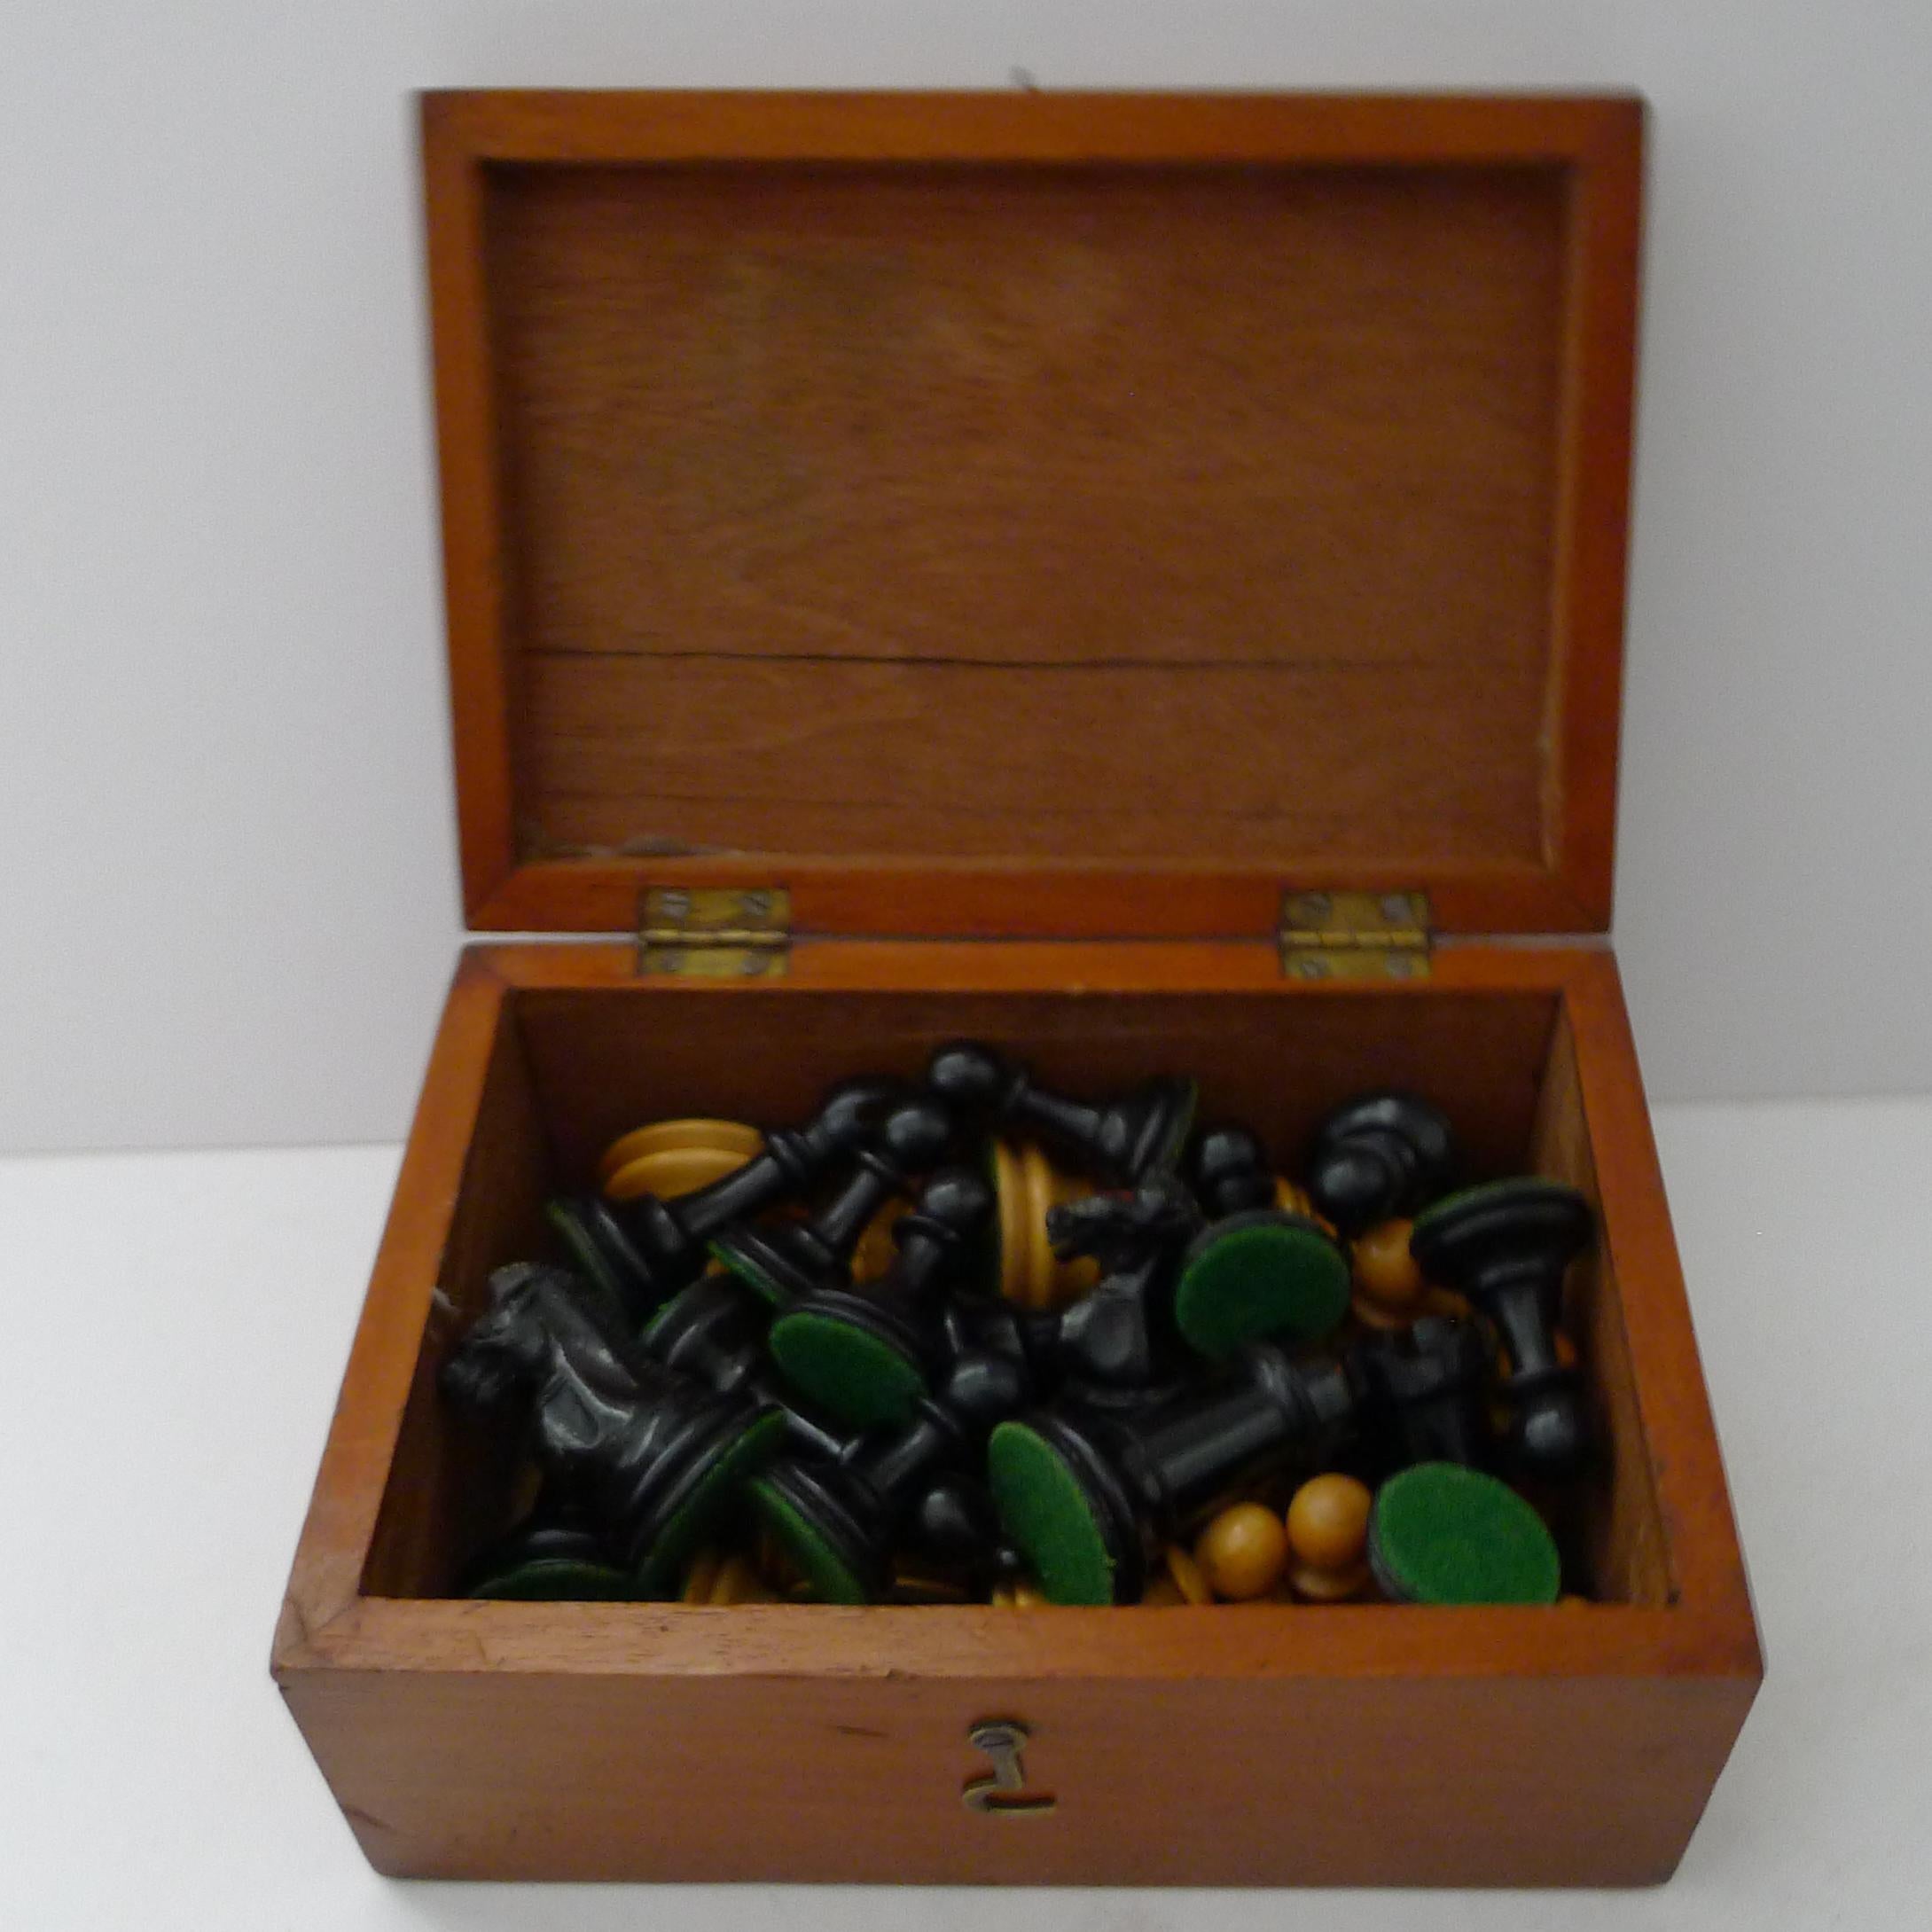 Antique English Staunton Chess Set With Red Crown Marks c.1900 For Sale 3